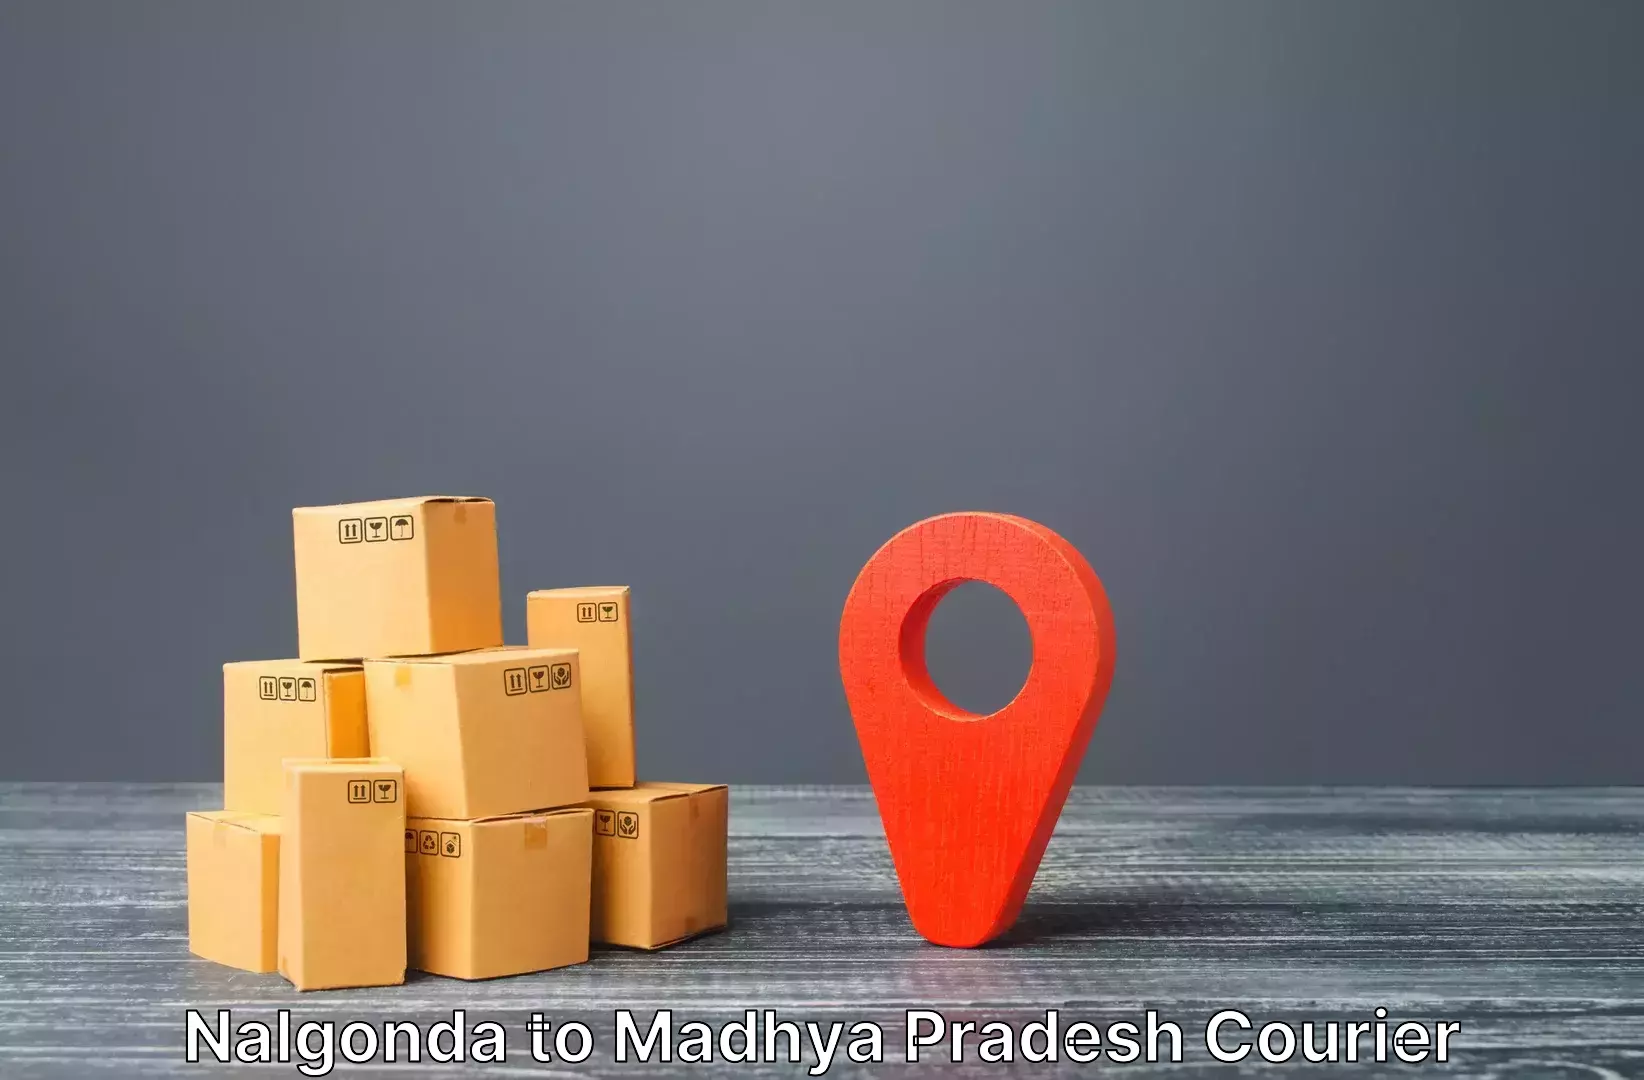 Reliable baggage delivery Nalgonda to IIIT Bhopal